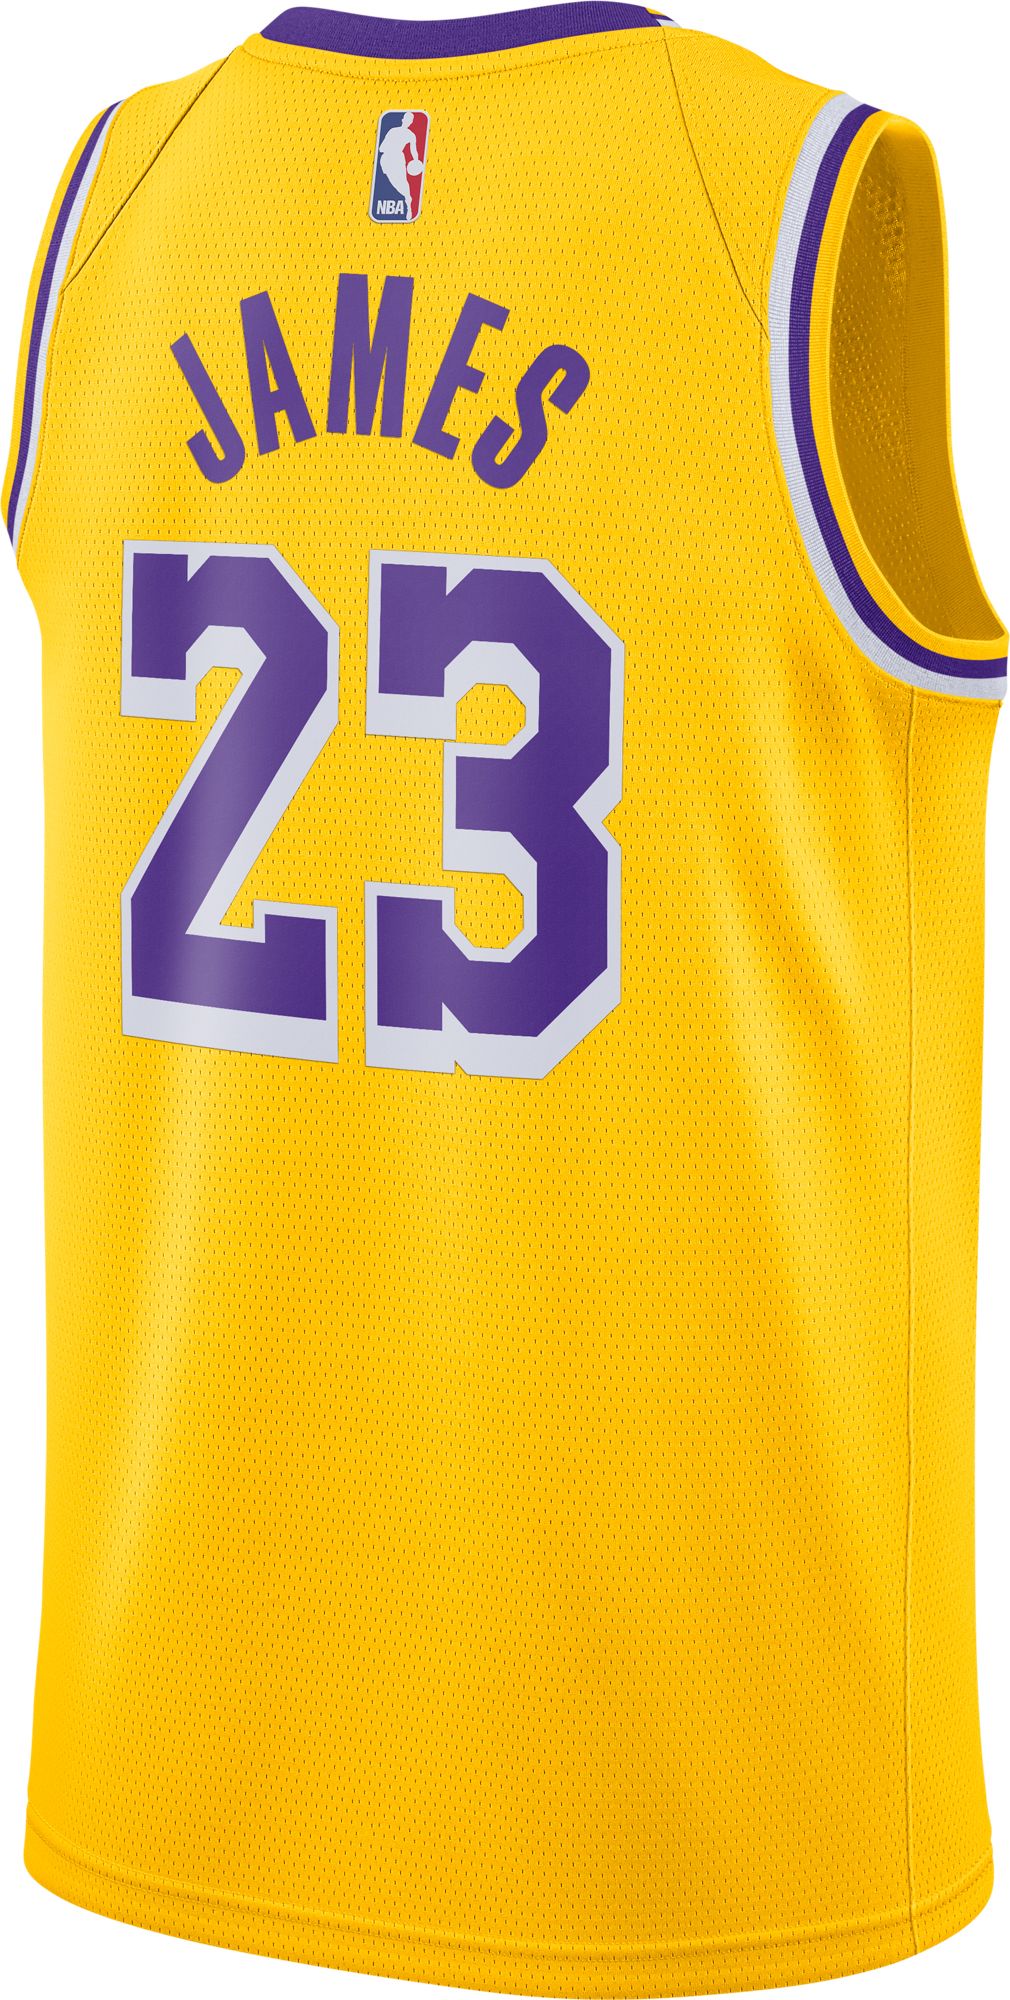 lakers jersey 23 james